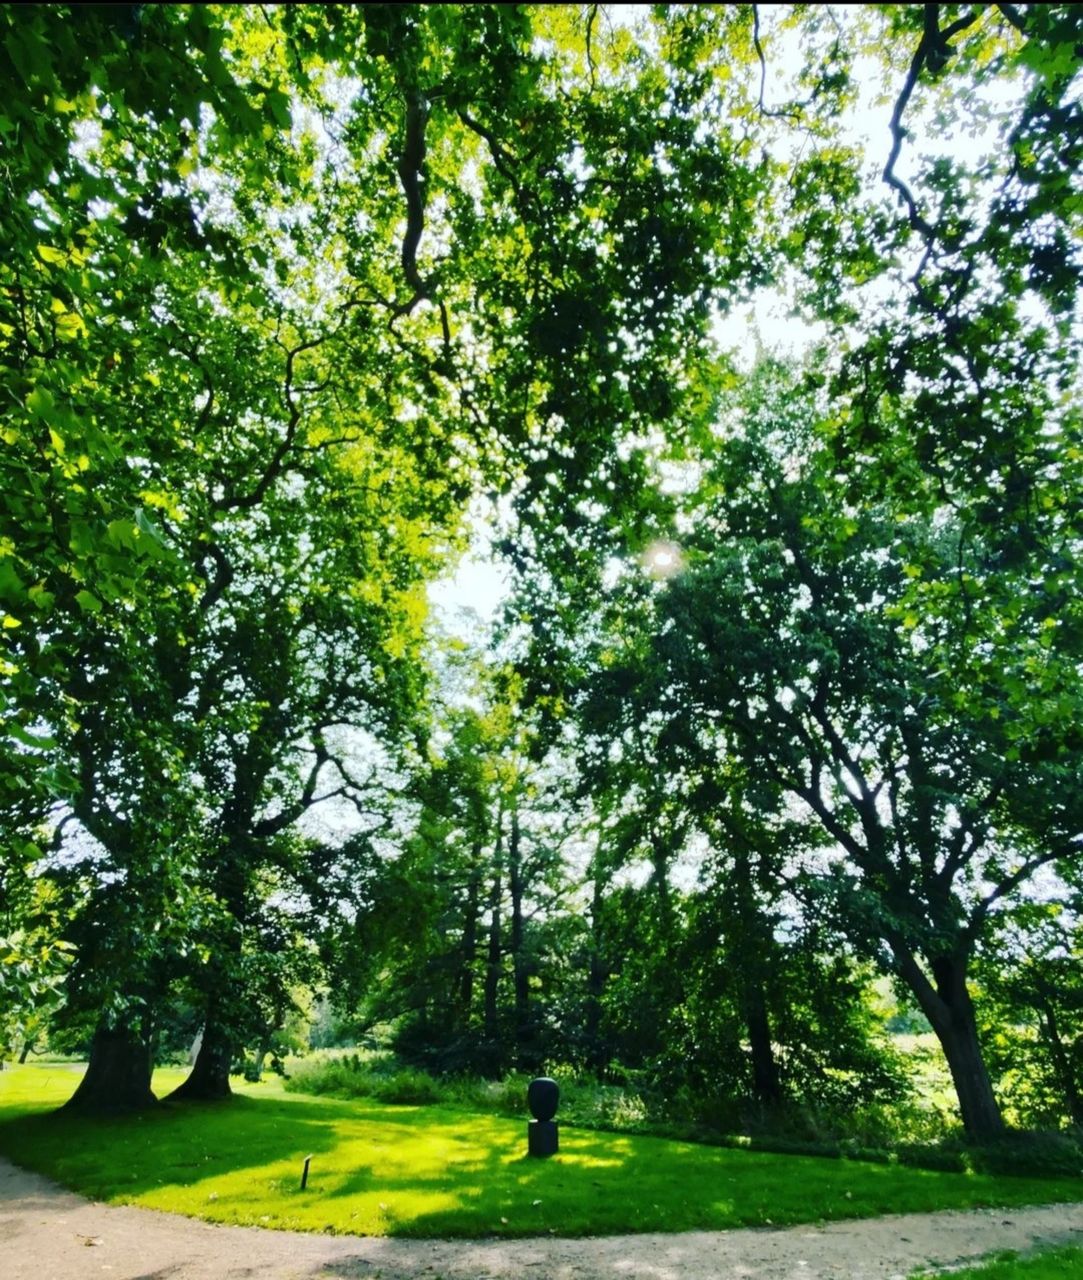 plant, tree, green, leaf, growth, nature, day, sunlight, beauty in nature, woodland, tranquility, one person, outdoors, footpath, leisure activity, flower, land, branch, full length, park, shadow, forest, tranquil scene, scenics - nature, grass, lifestyles, men, walking, lush foliage, foliage